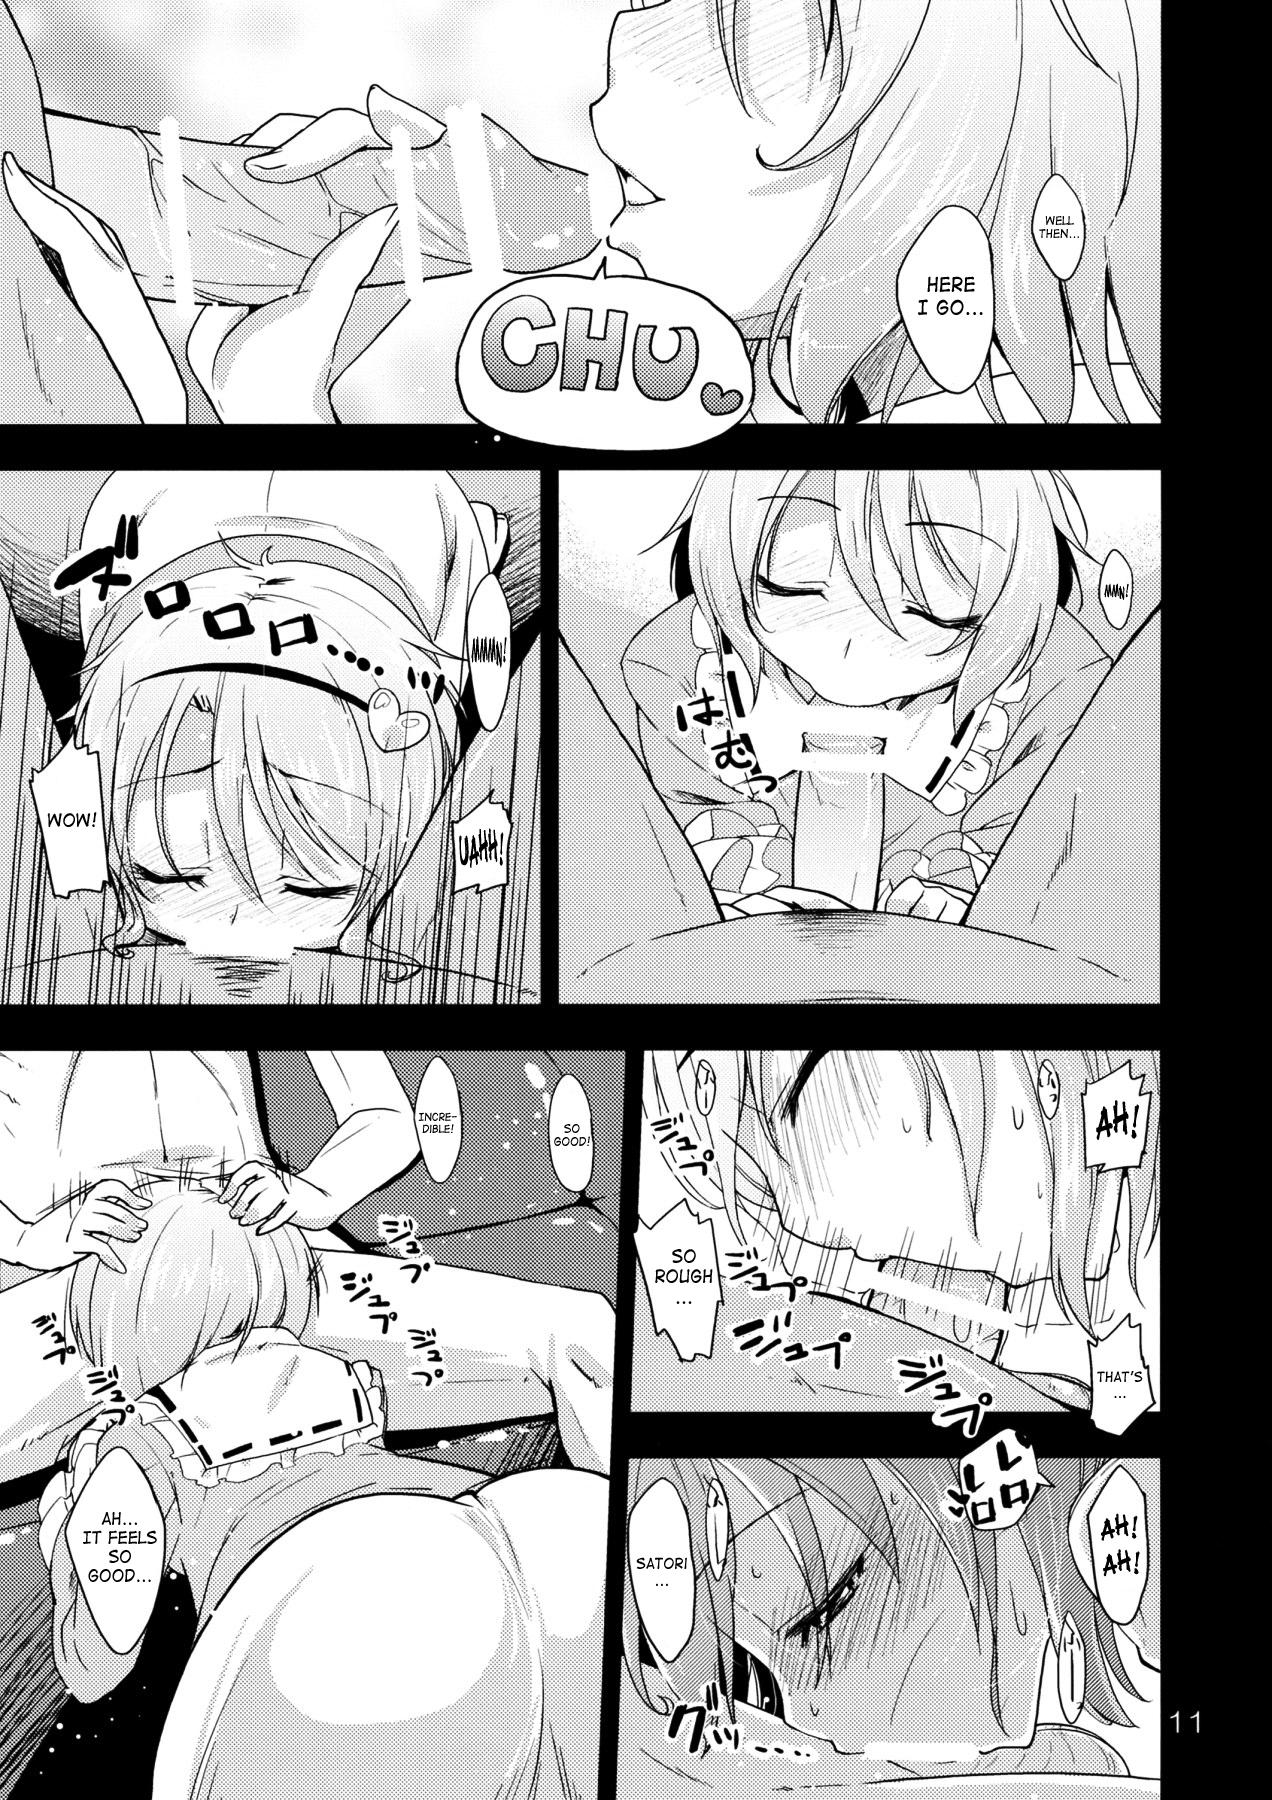 4some Urakoi Vol. 4 - Touhou project Rough Sex - Page 11